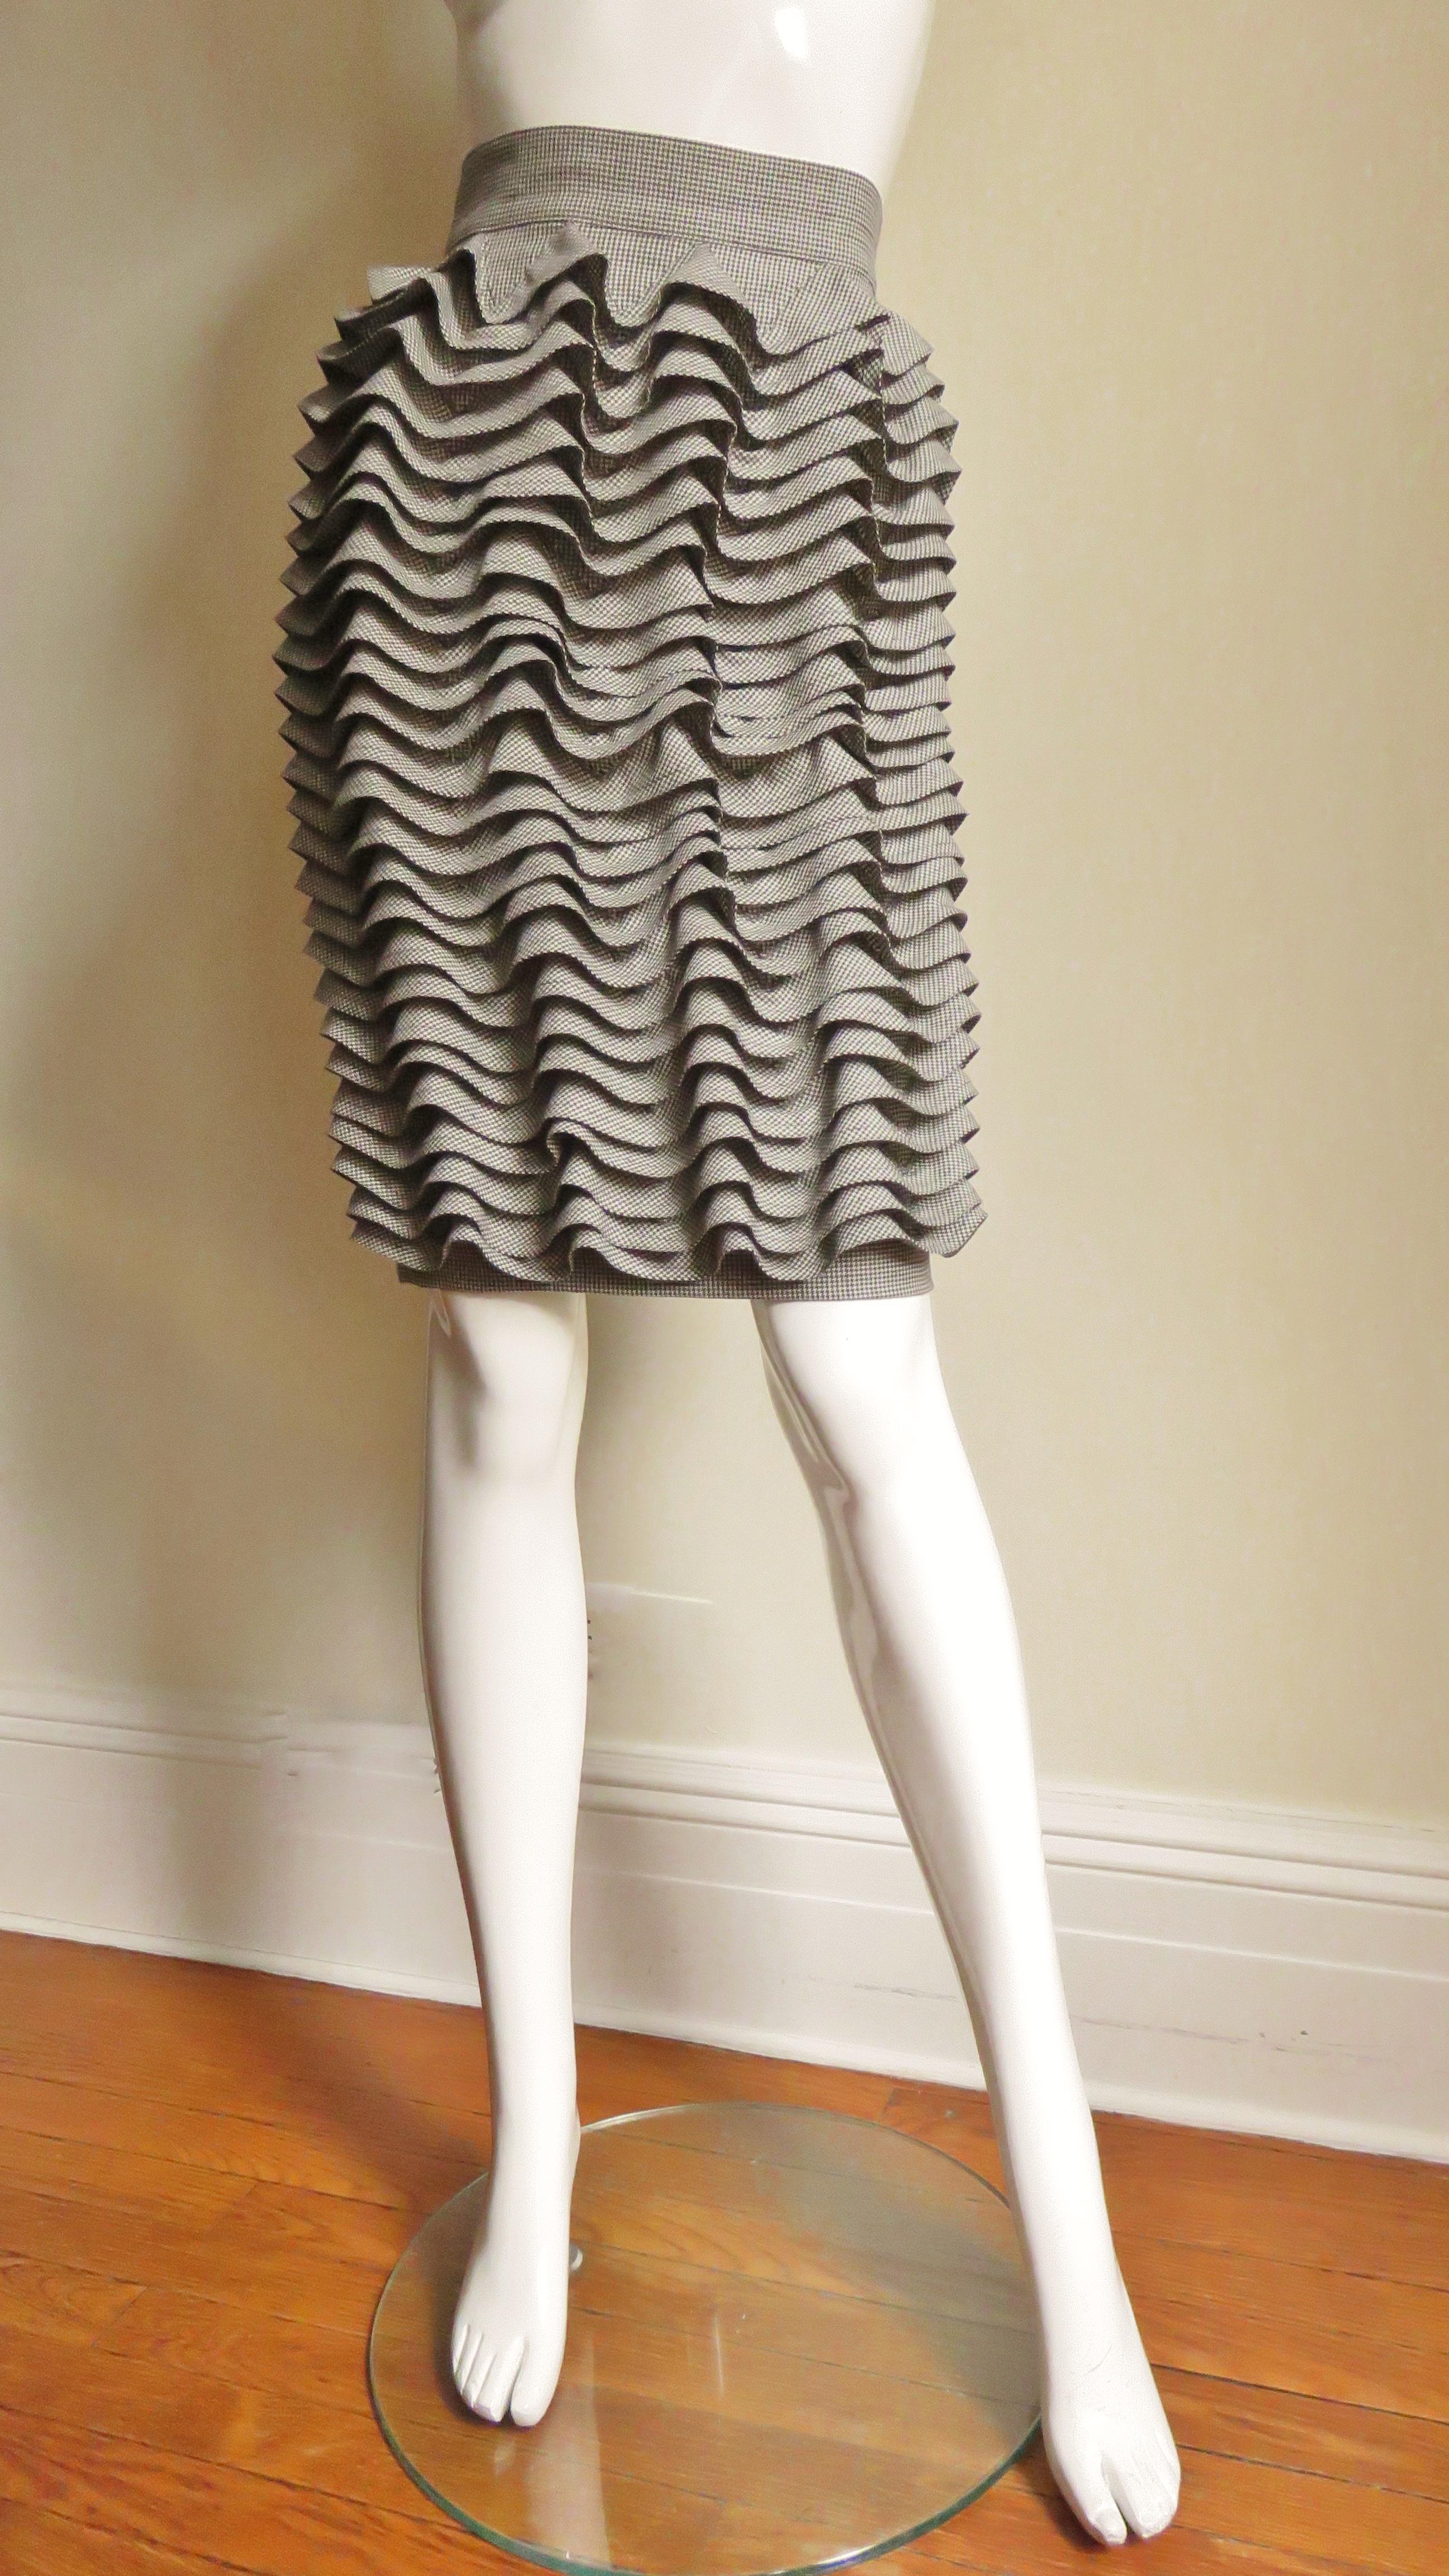 A fabulous light weight wool in an off white and black hounds tooth print ruffle skirt from Gianni Versace Couture.  It is pencil style with a waistband and row upon row of ruffles around it's circumference from top to bottom. It has a center back